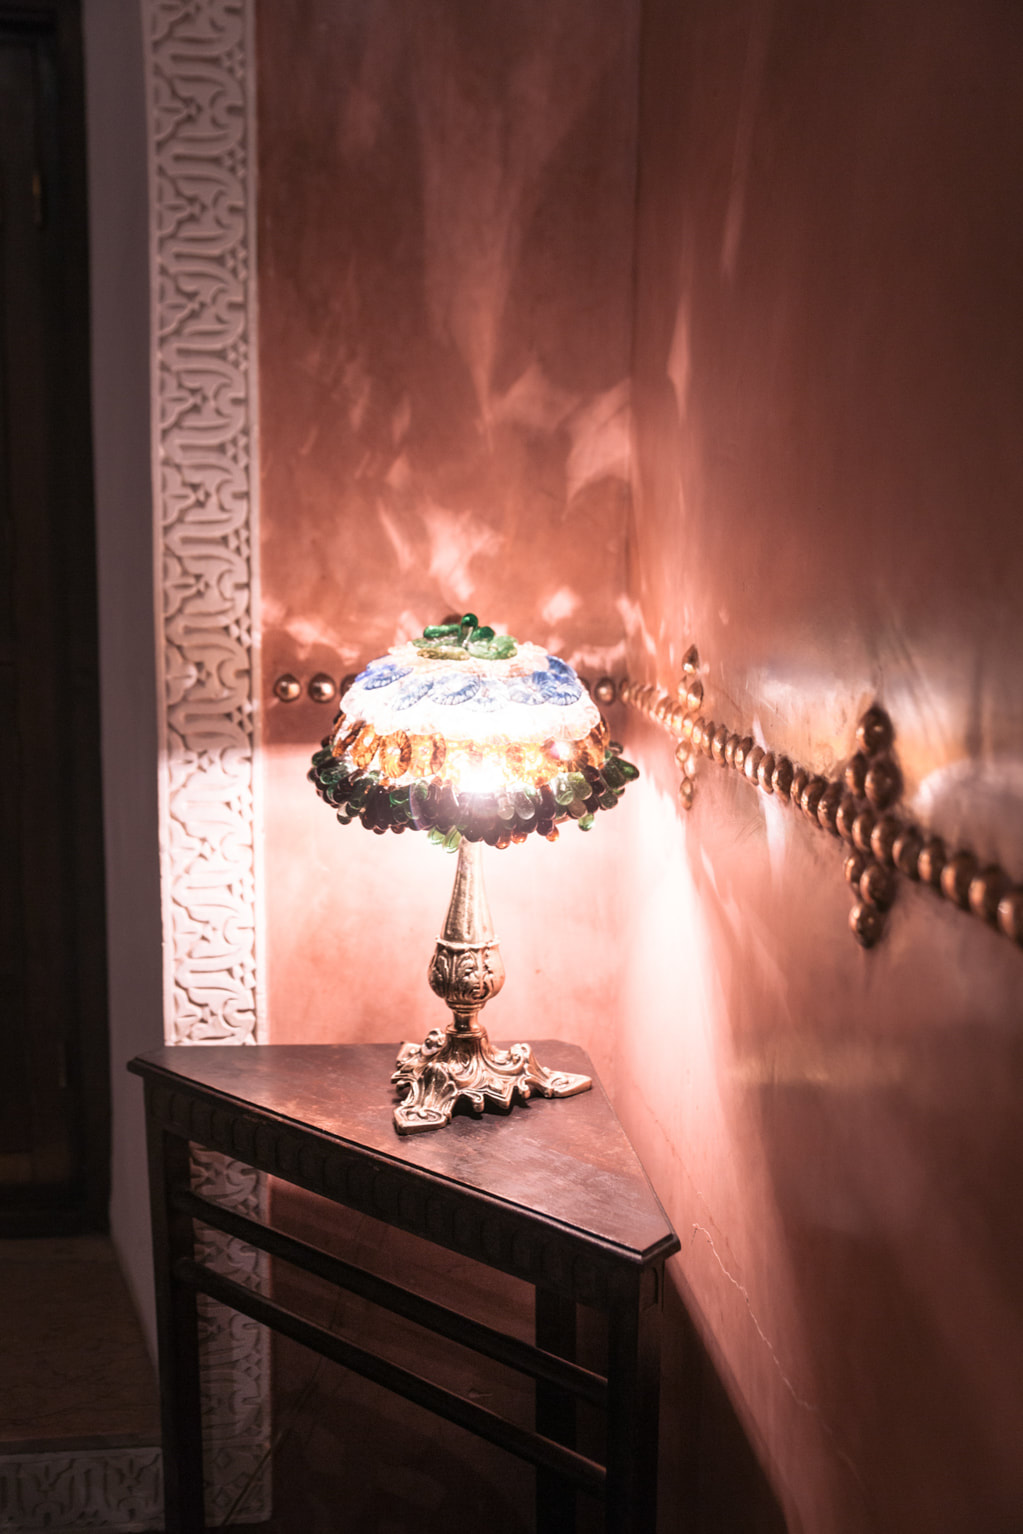 El Fenn at night, Marrakech boutique riad at night by The Belle Blog  